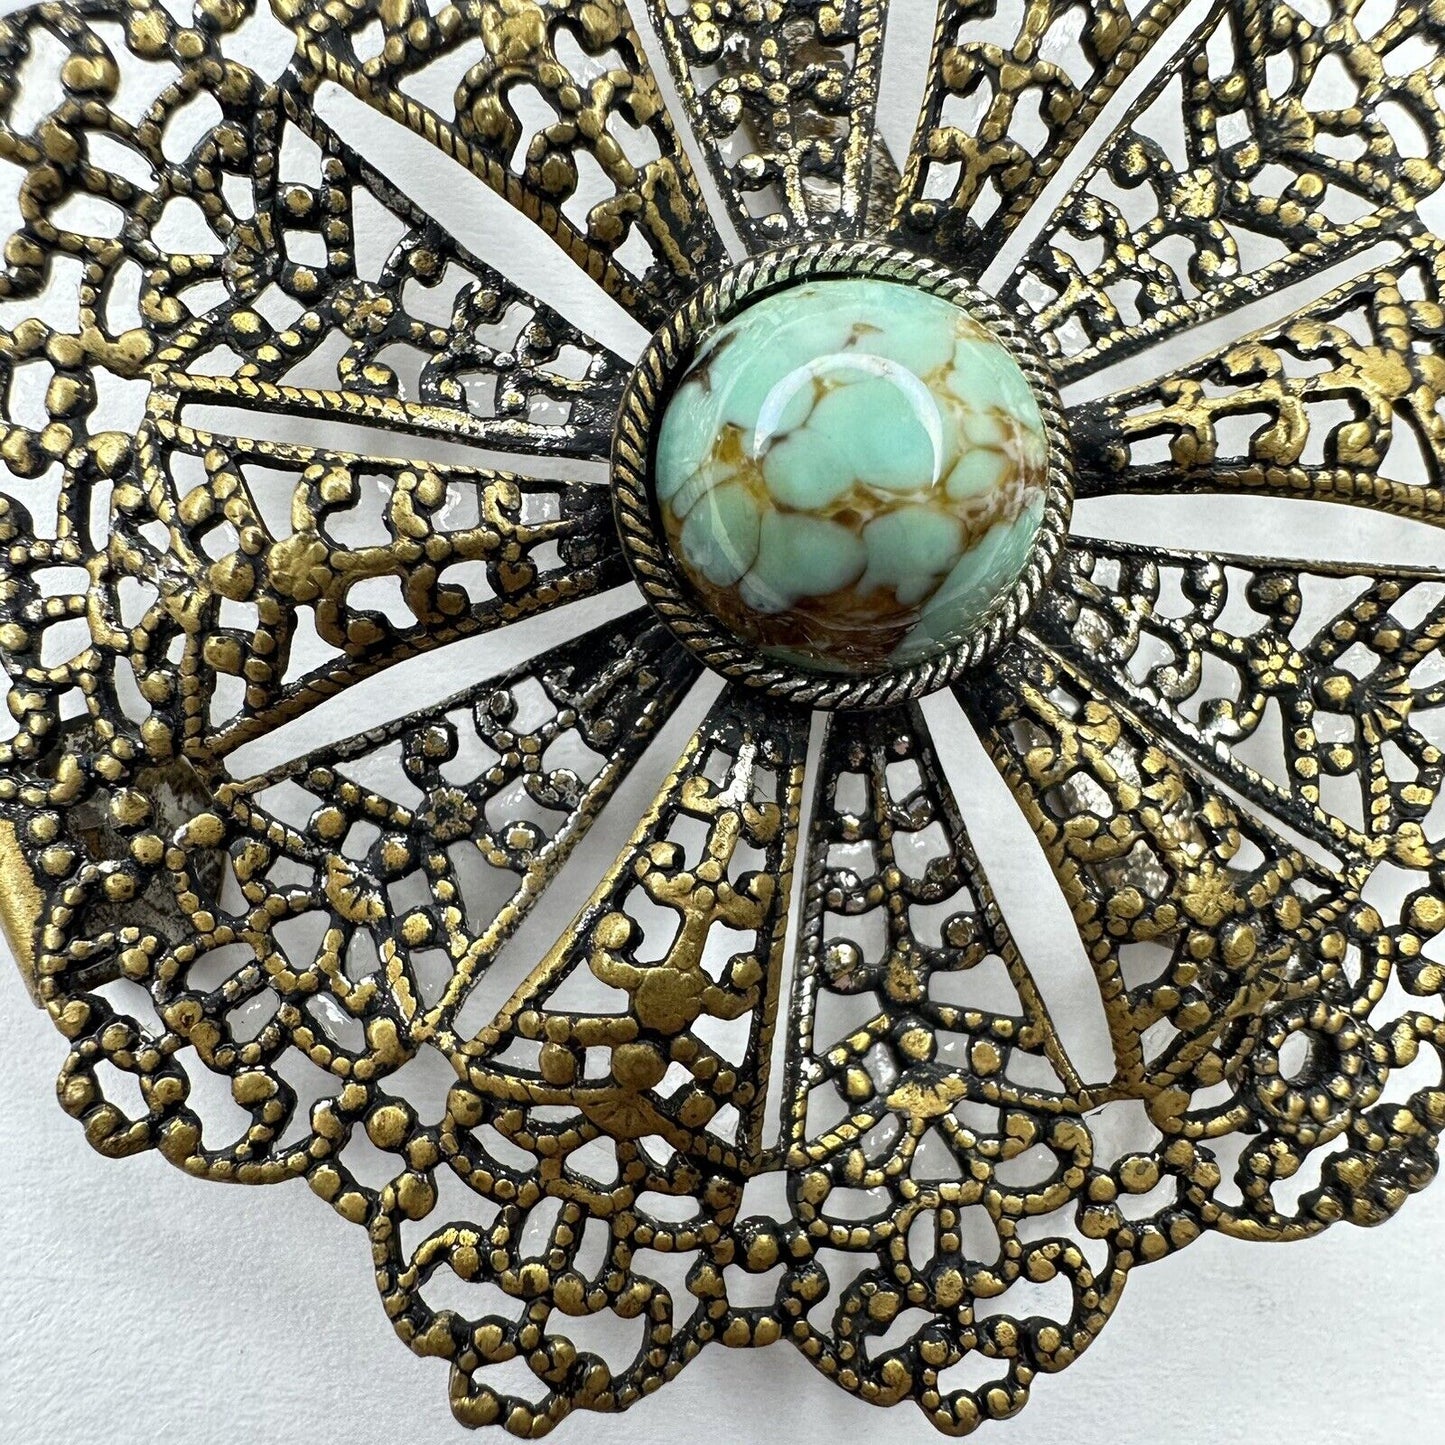 Elegant Vintage Art Deco Filigree Brooch with Turquoise Glass Cabochon – Exquisite Antique Jewelry Clip Pin - TreasuTiques